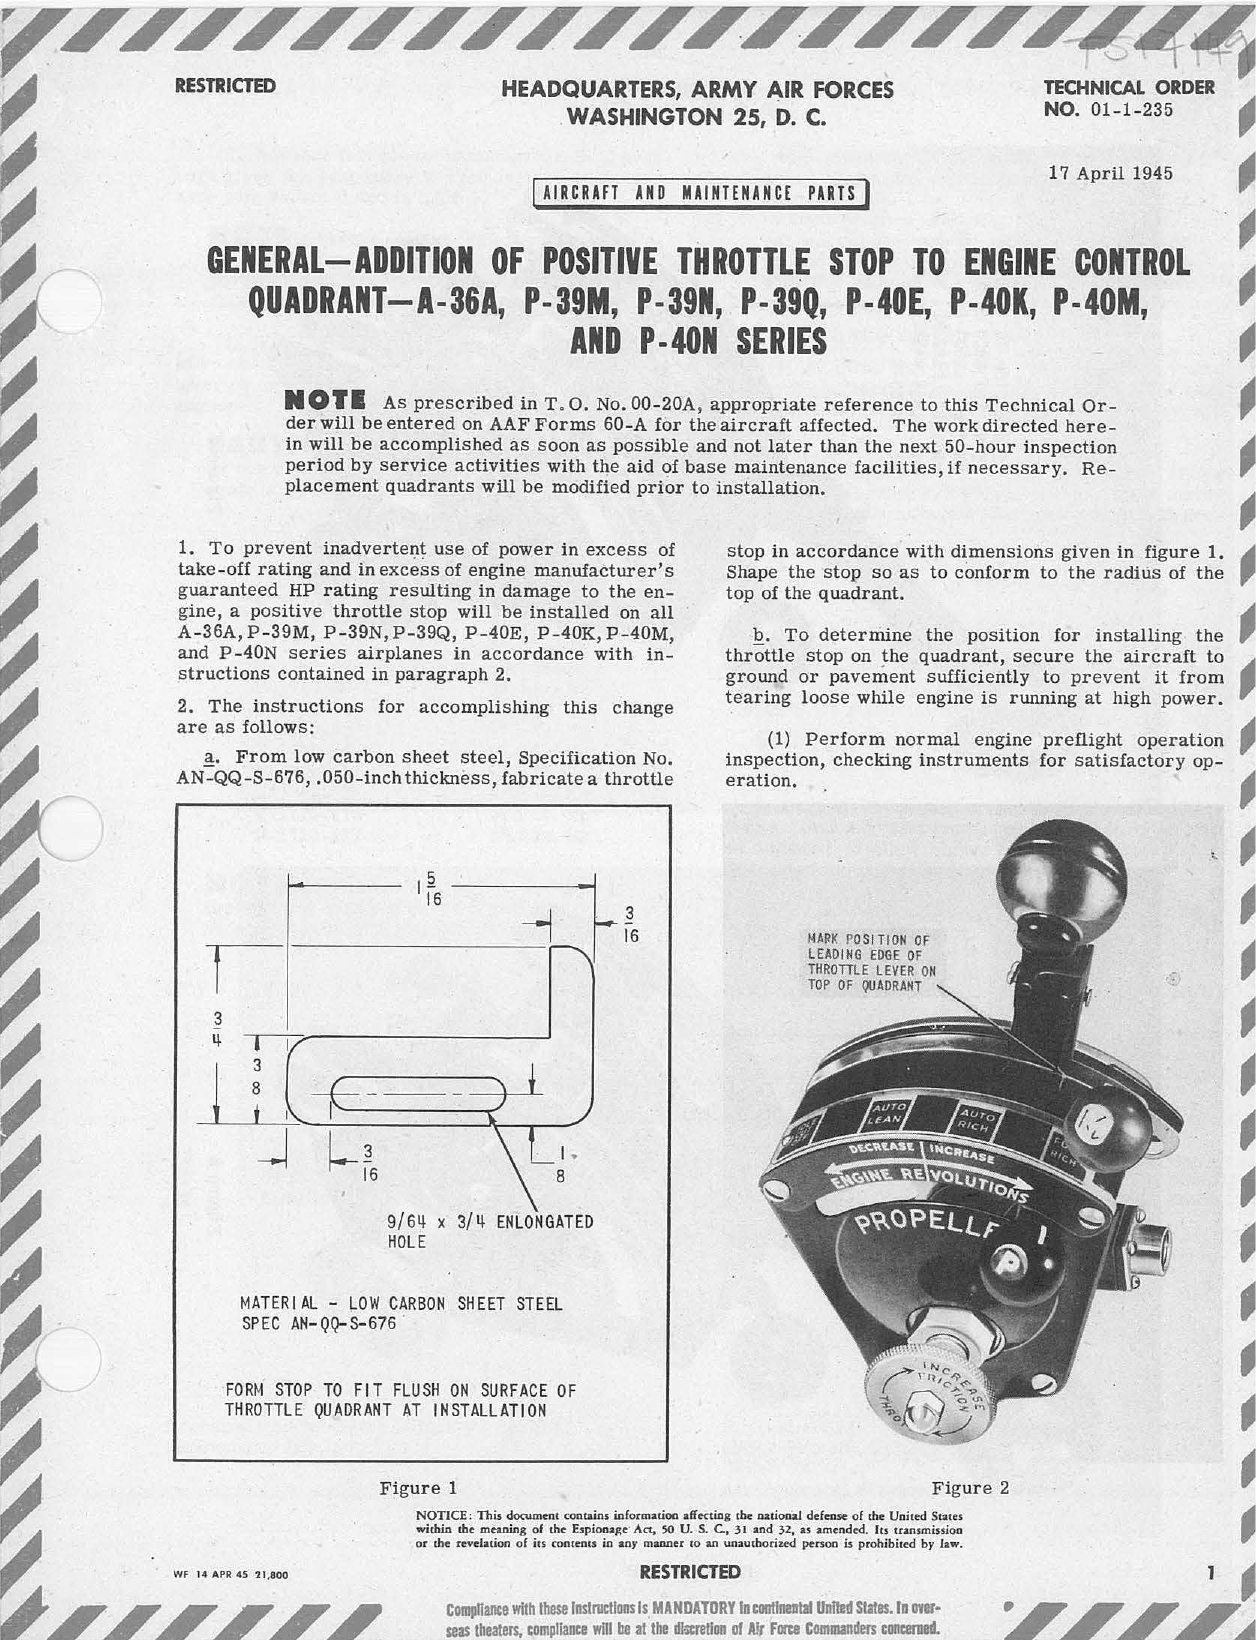 Sample page 1 from AirCorps Library document: General Addition of Positive Throttle Stop to Engine Control Quadrant for A-36A, P-39M, P-39N, P-39Q, P-40E, P-40K, P-40M, P-40N Series